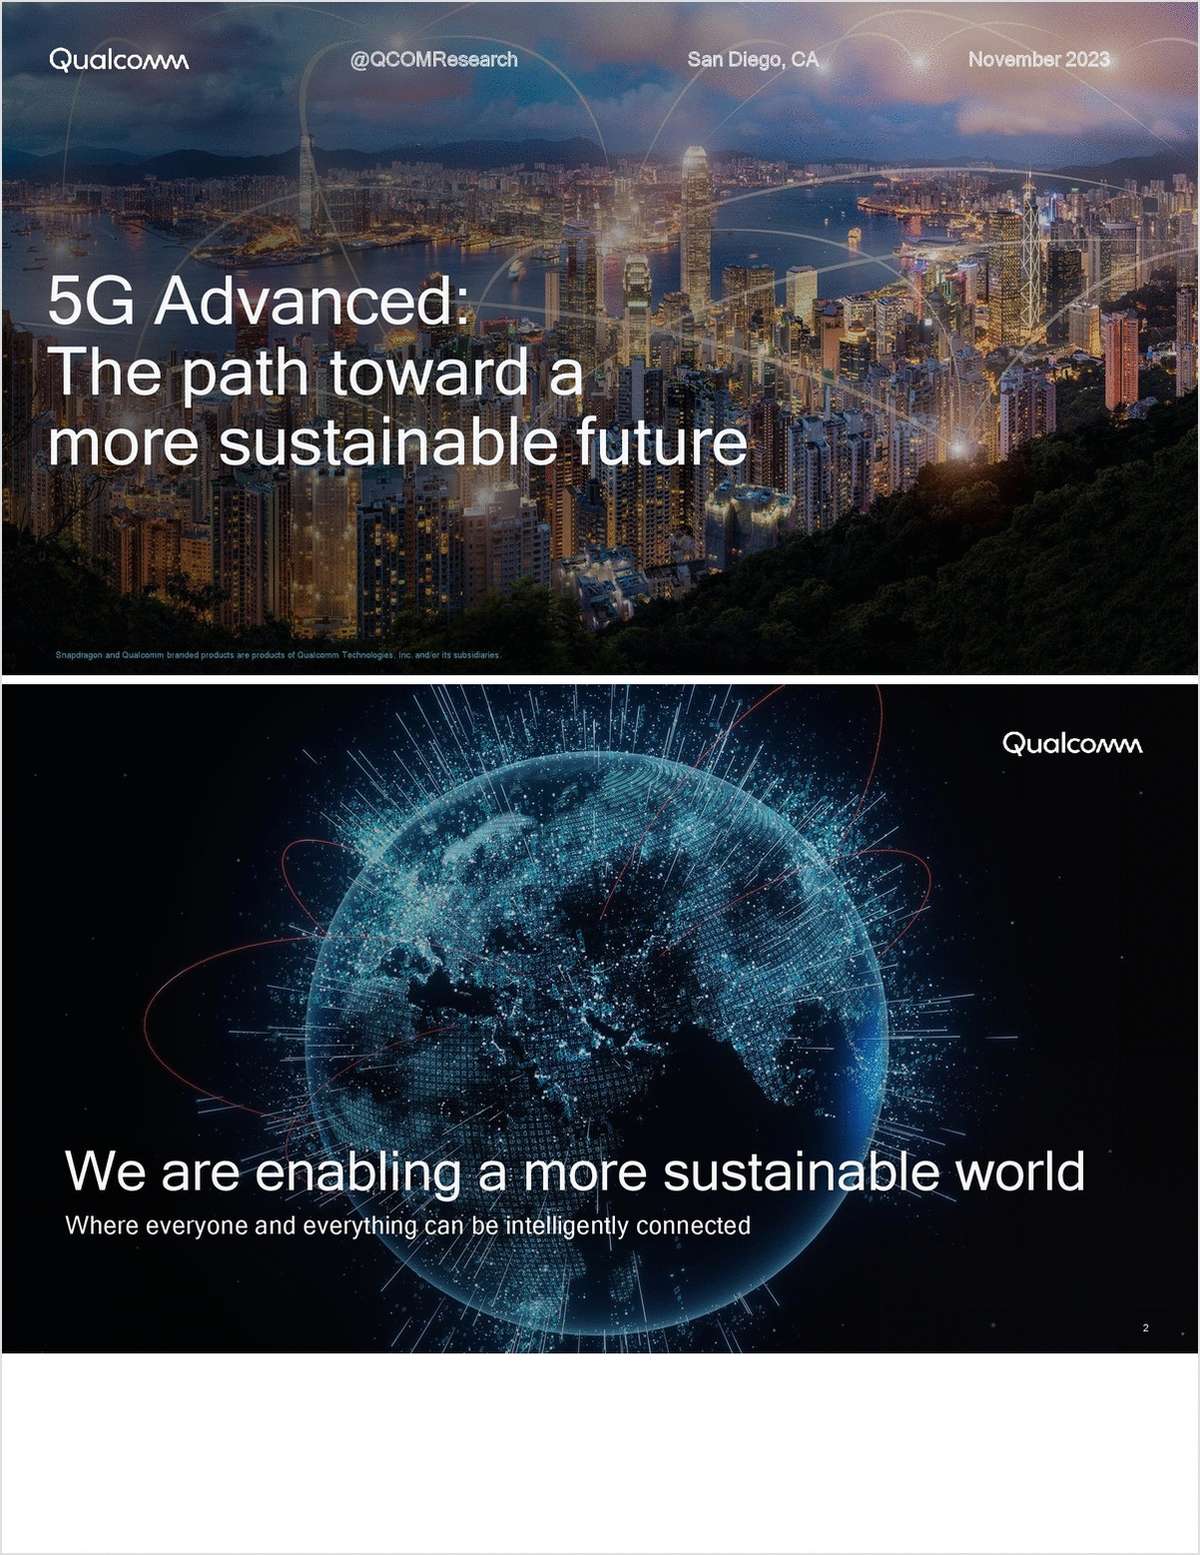 5G Advanced: The path toward a more sustainable future